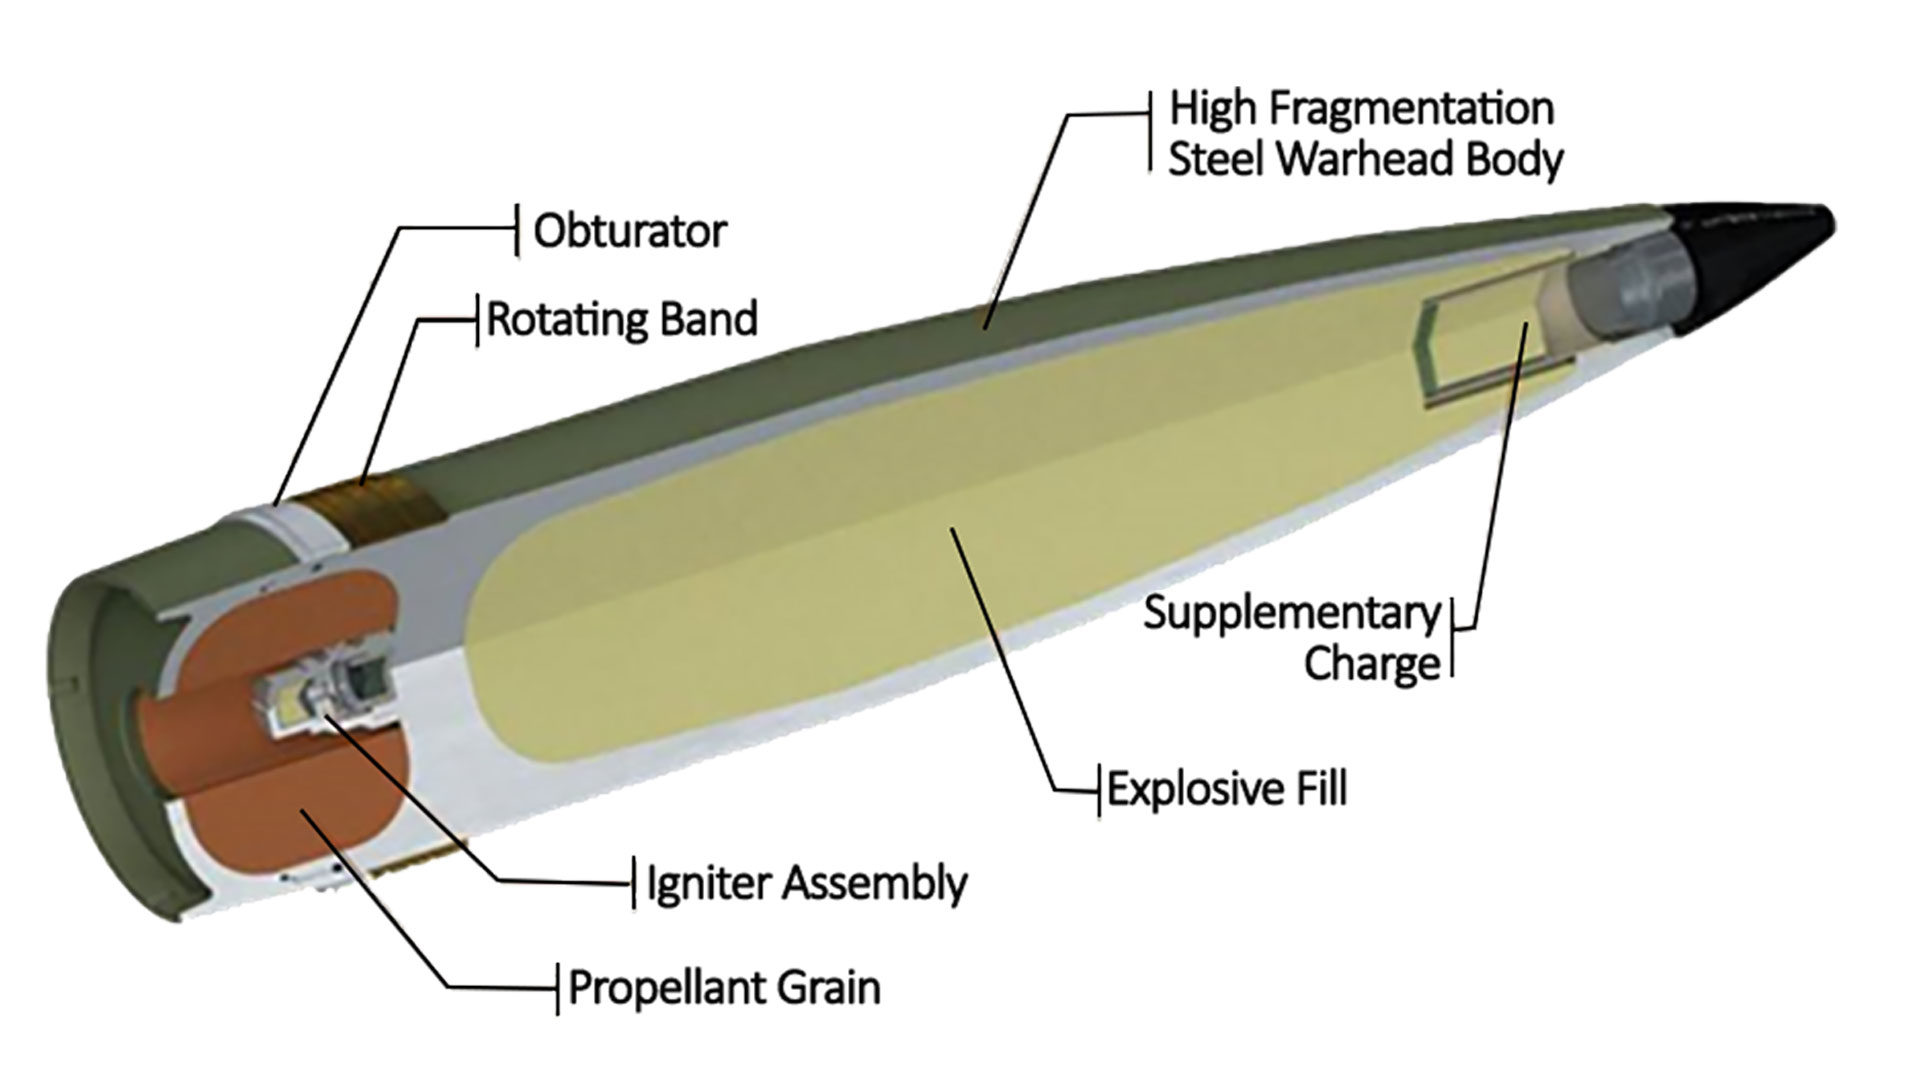 Among the components of the XM1128 is propellant grain, which reduces drag and allows the projectile to travel longer distances. Before issuing the Cornerstone OTA, the industrial base lacked the capacity to load, assemble and pack projectiles with that feature. (Graphic courtesy of the authors)